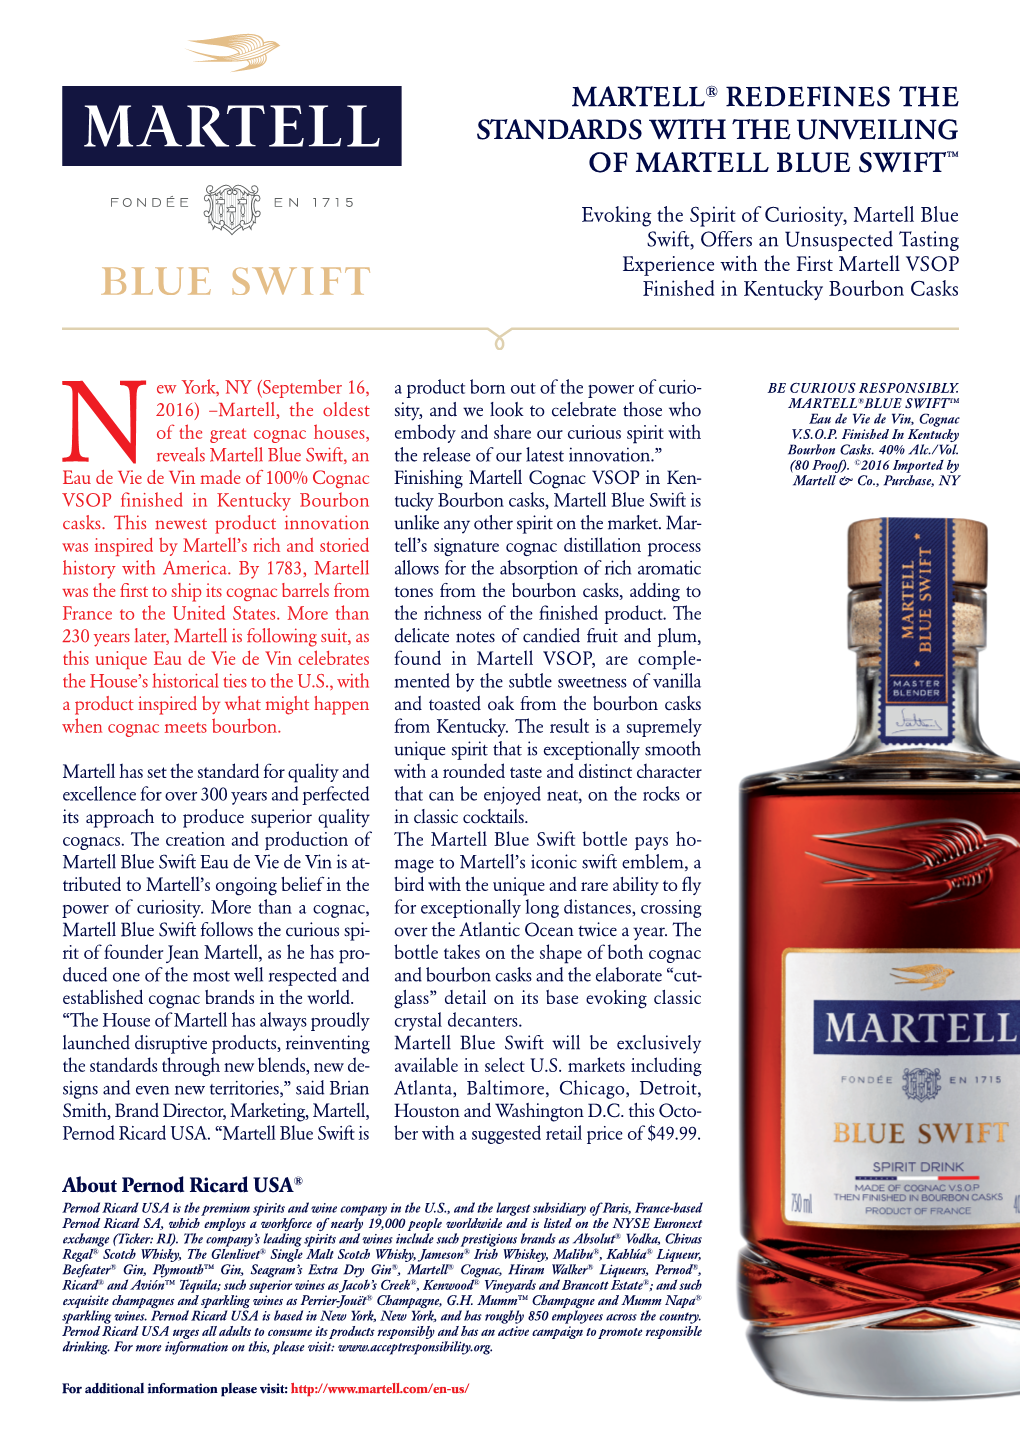 Martell® Redefines the Standards with the Unveiling of Martell Blue Swift™